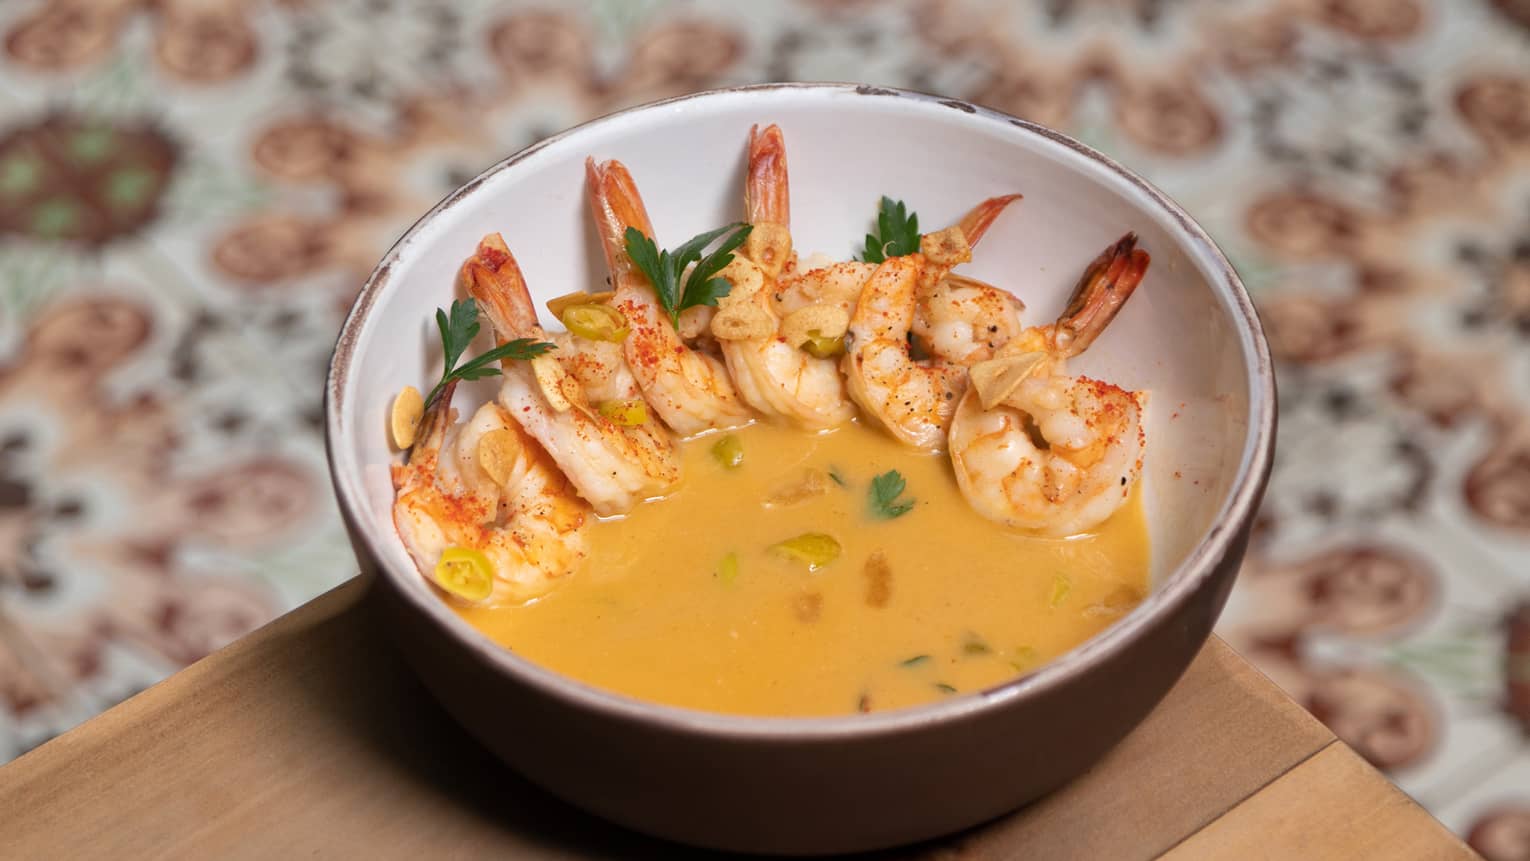 Shrimp in a yellow sauce served in a ceramic bowl.